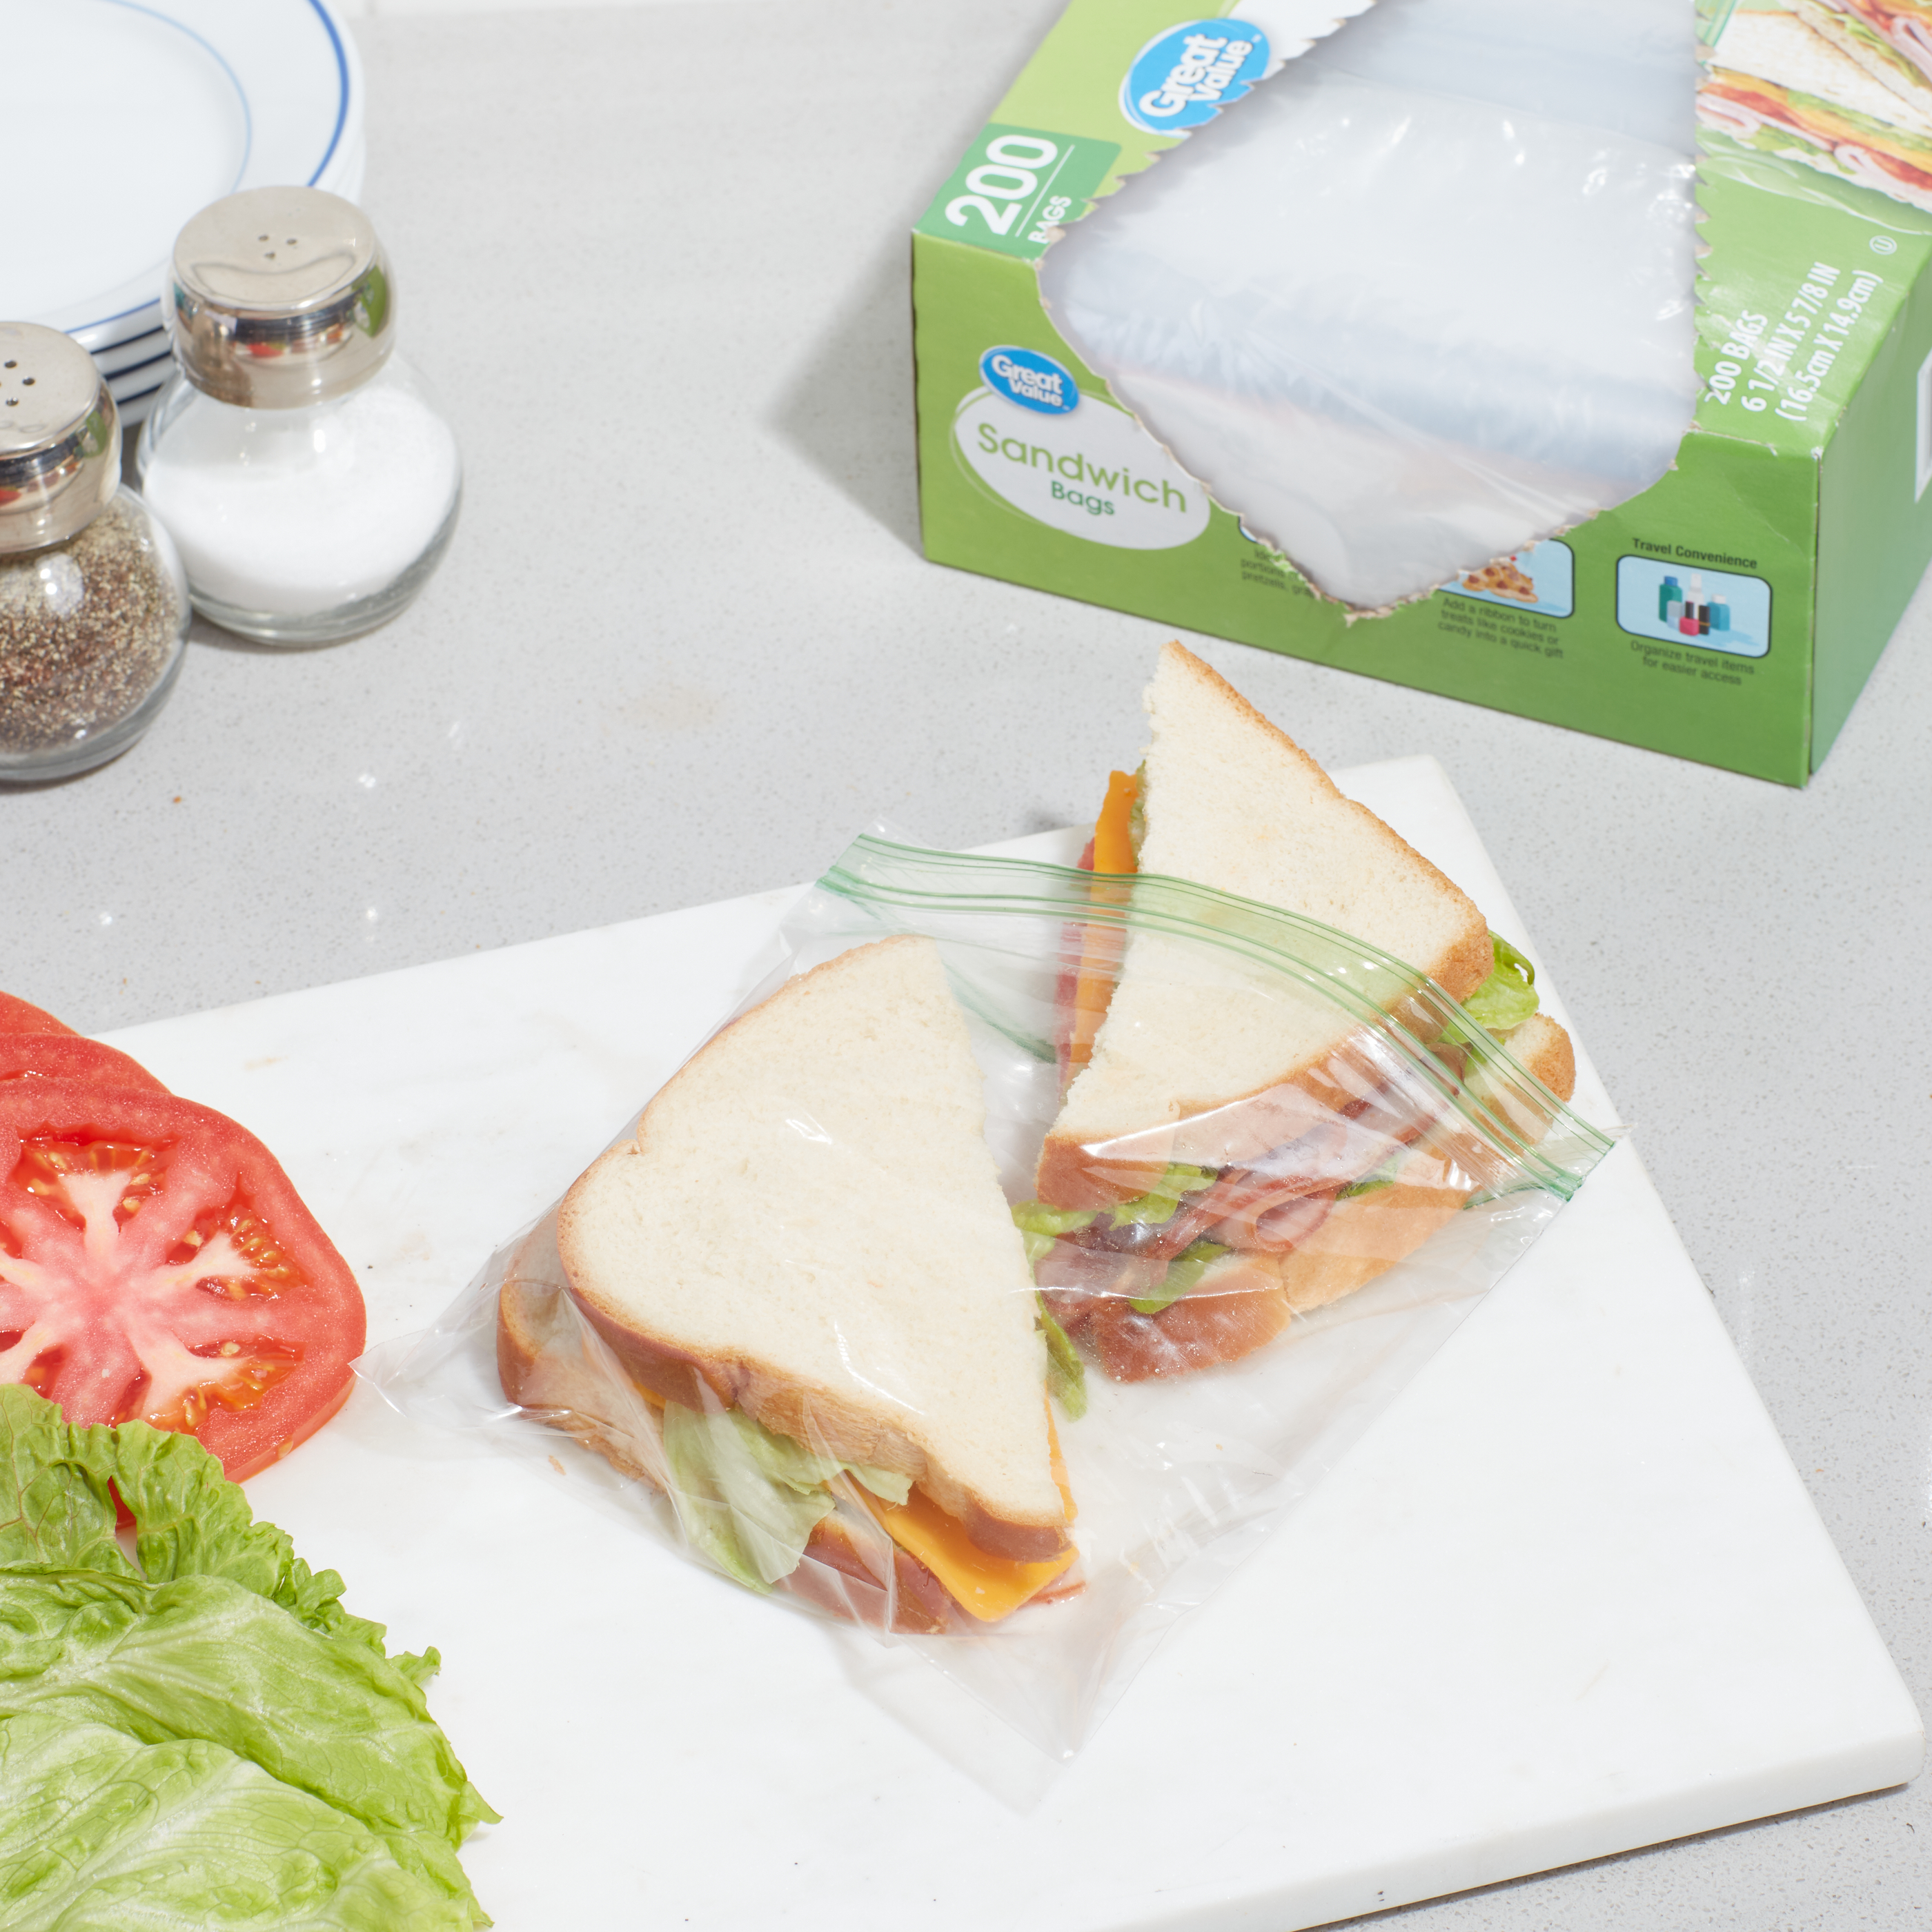 Great Value Double Zipper Sandwich Bags, 200 Count - image 4 of 10